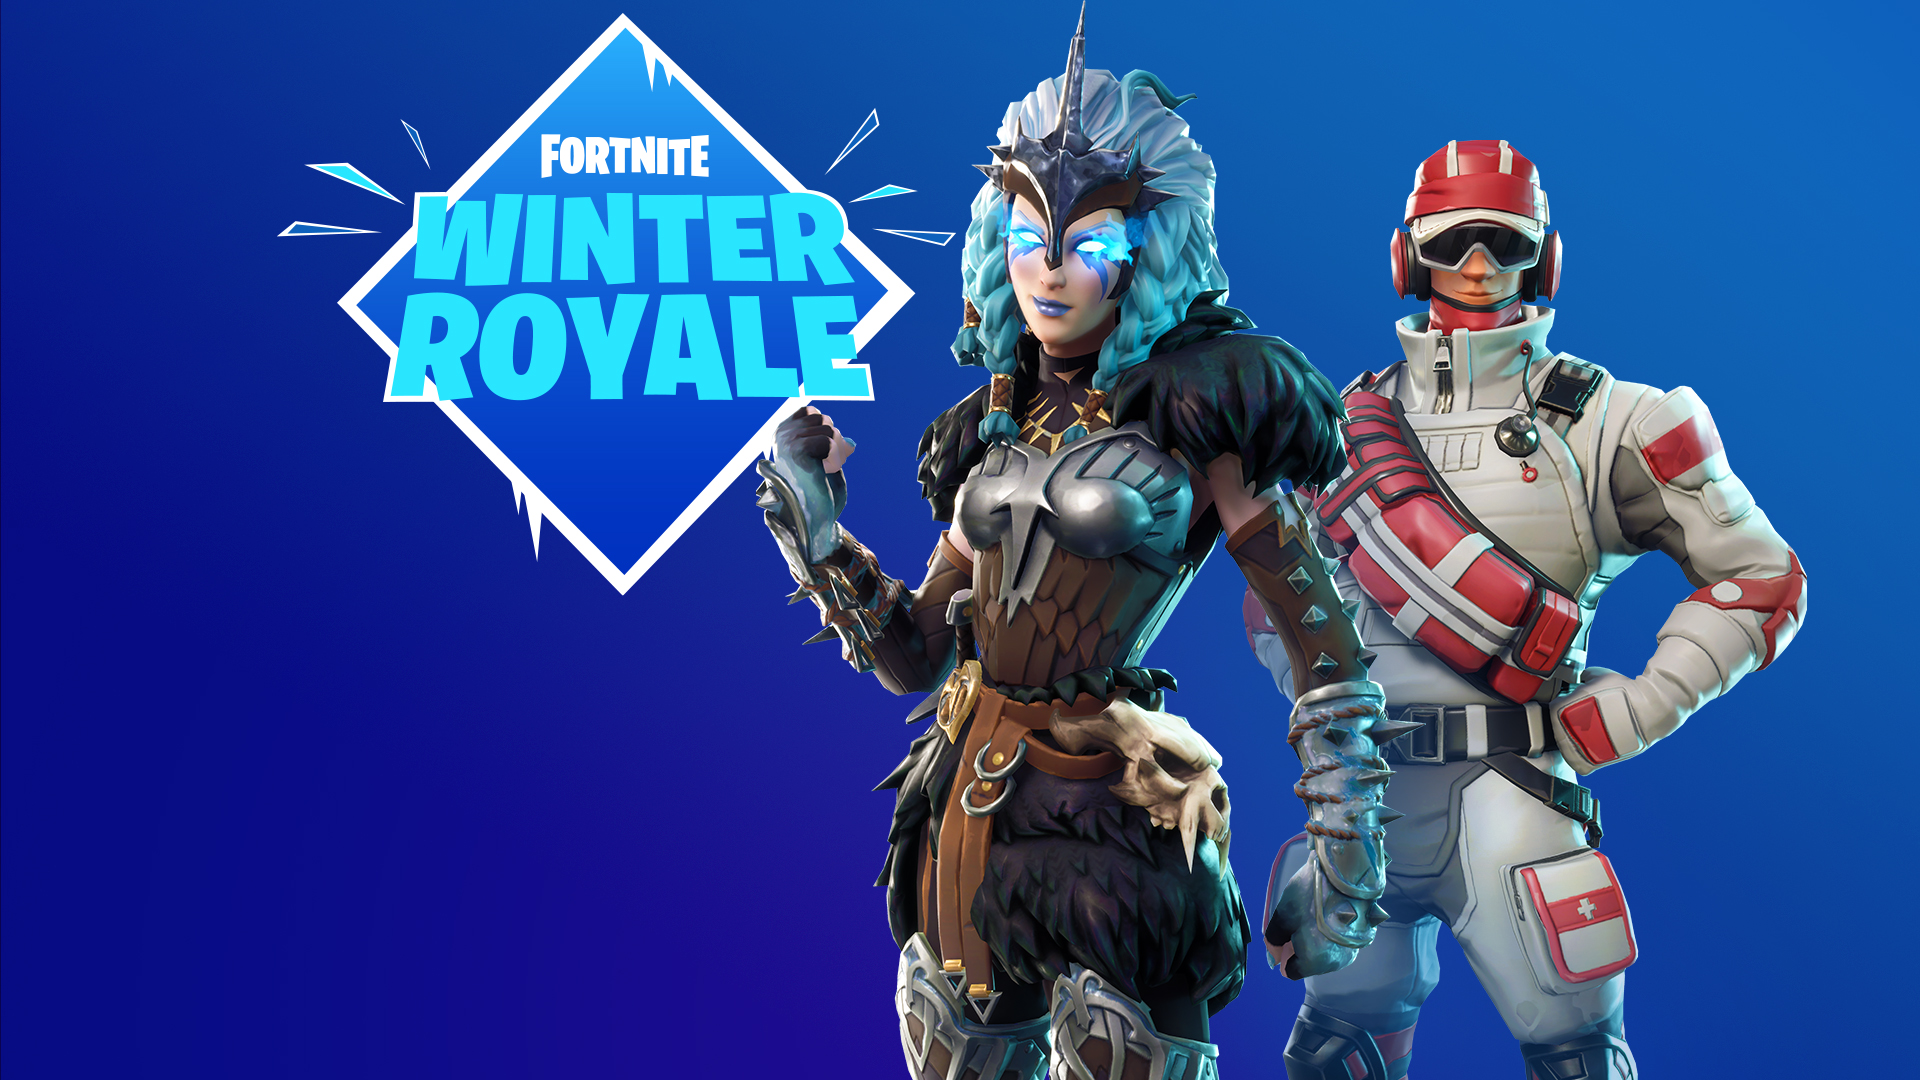 psalm and neace wreaked havoc with the infinity blade in the fortnite winter royale na semifinals - fortnite semi finals